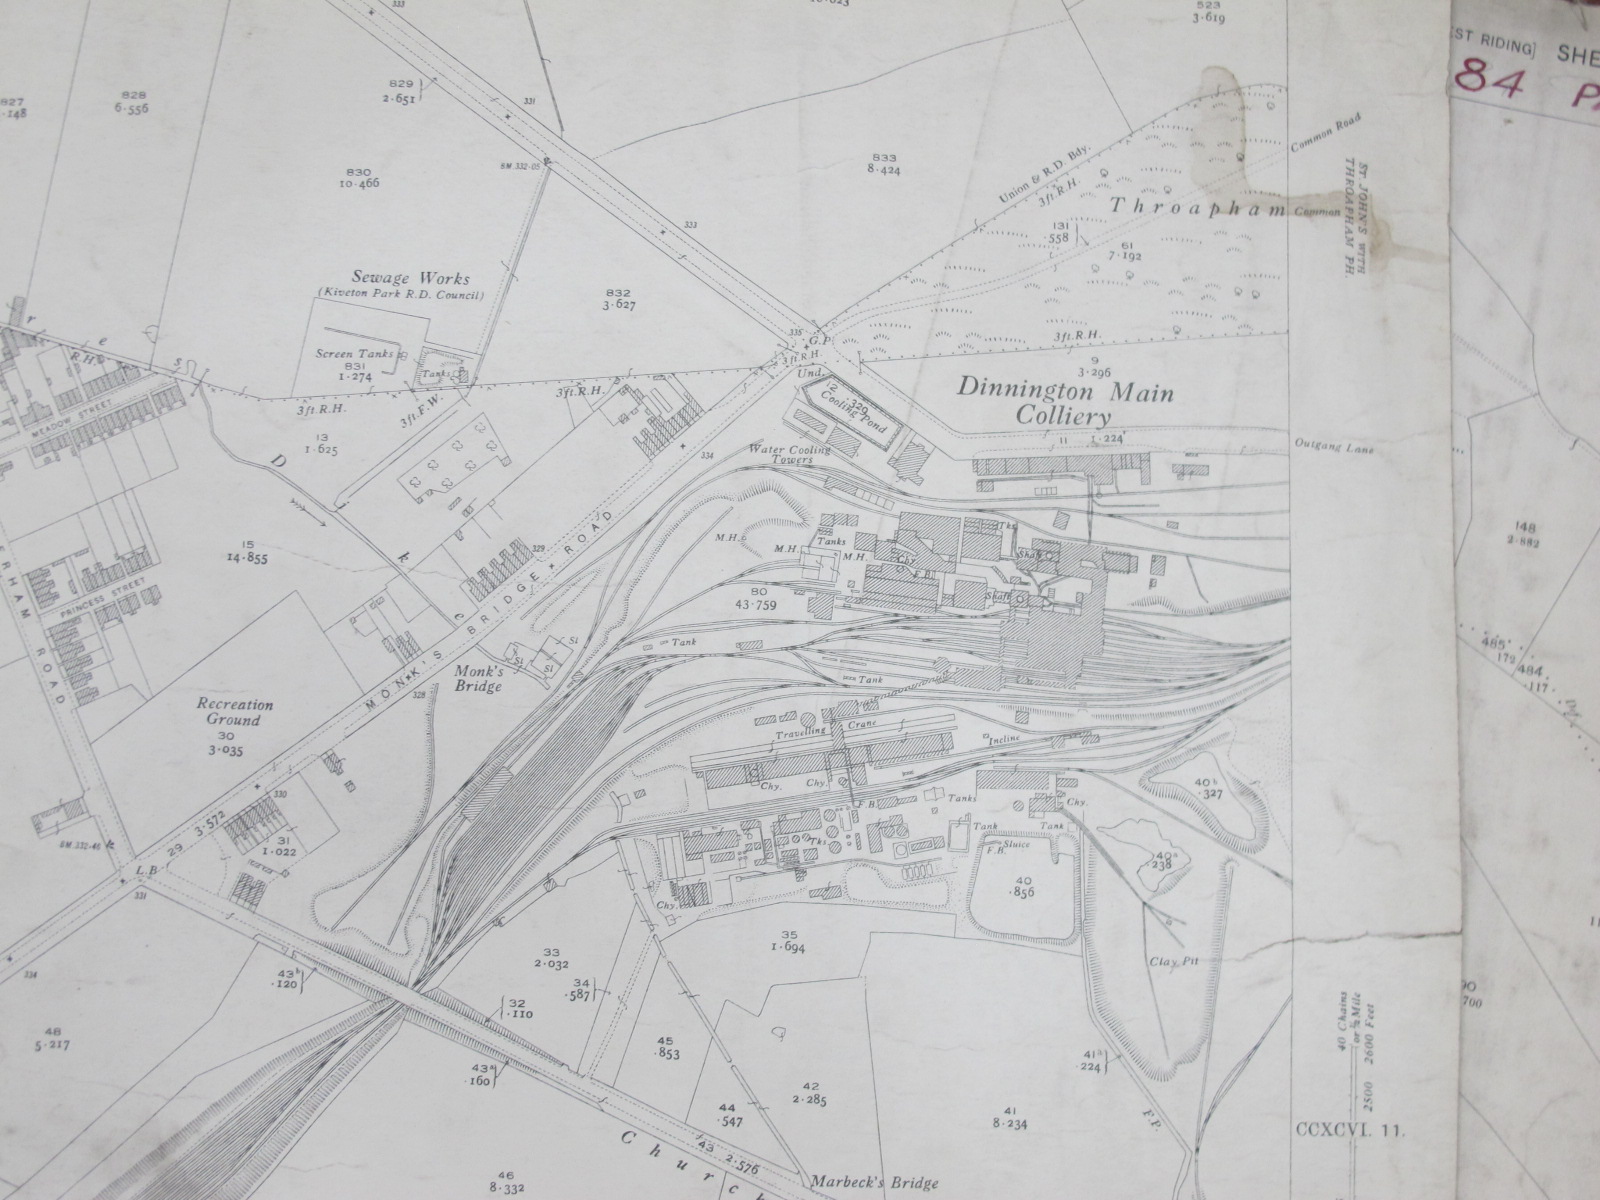 West Riding Yorkshire Maps, Rotherham, North Anston, Todwick and area - some dates noted, 1892, - Image 8 of 9